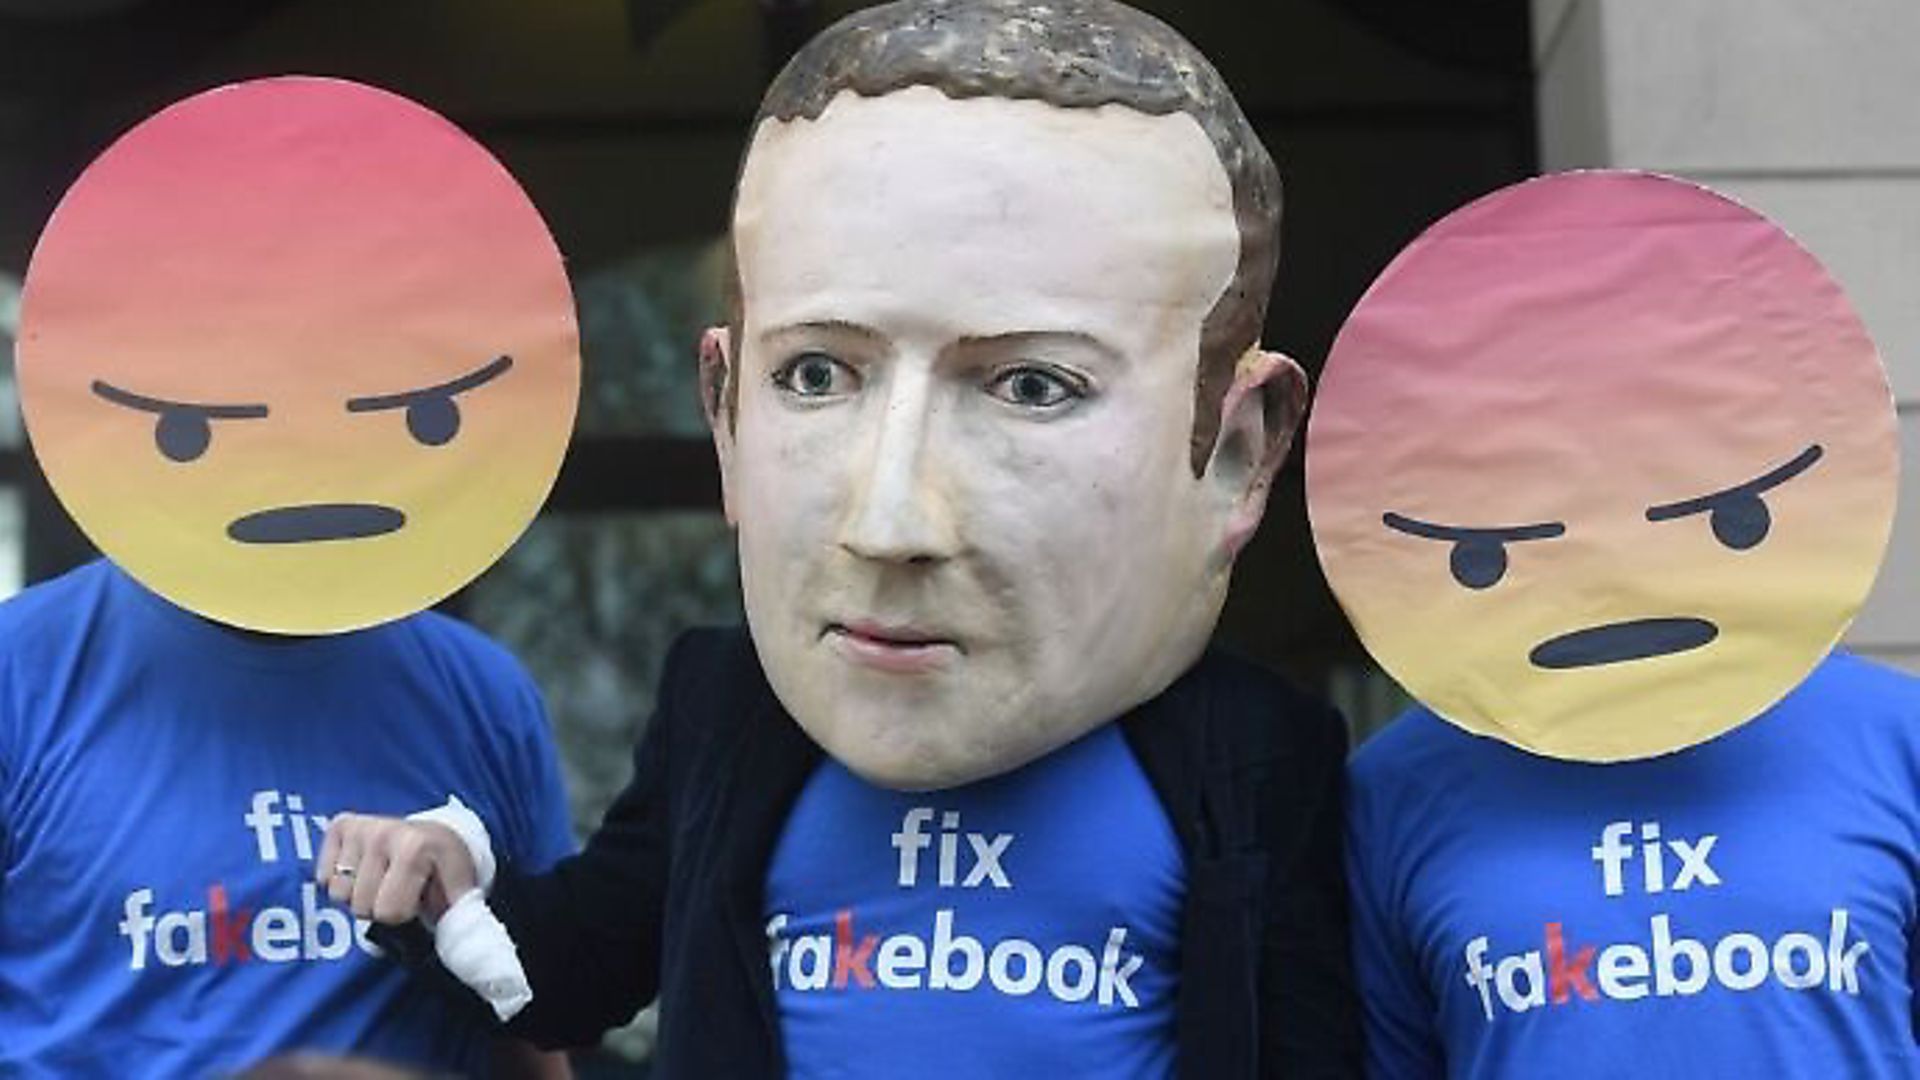 A Mark Zuckerberg figure with people in angry emoji masks outside Portcullis House in Westminster ahead of DCMS inquiry into fake news. Photograph: Victoria Jones/PA. - Credit: Archant